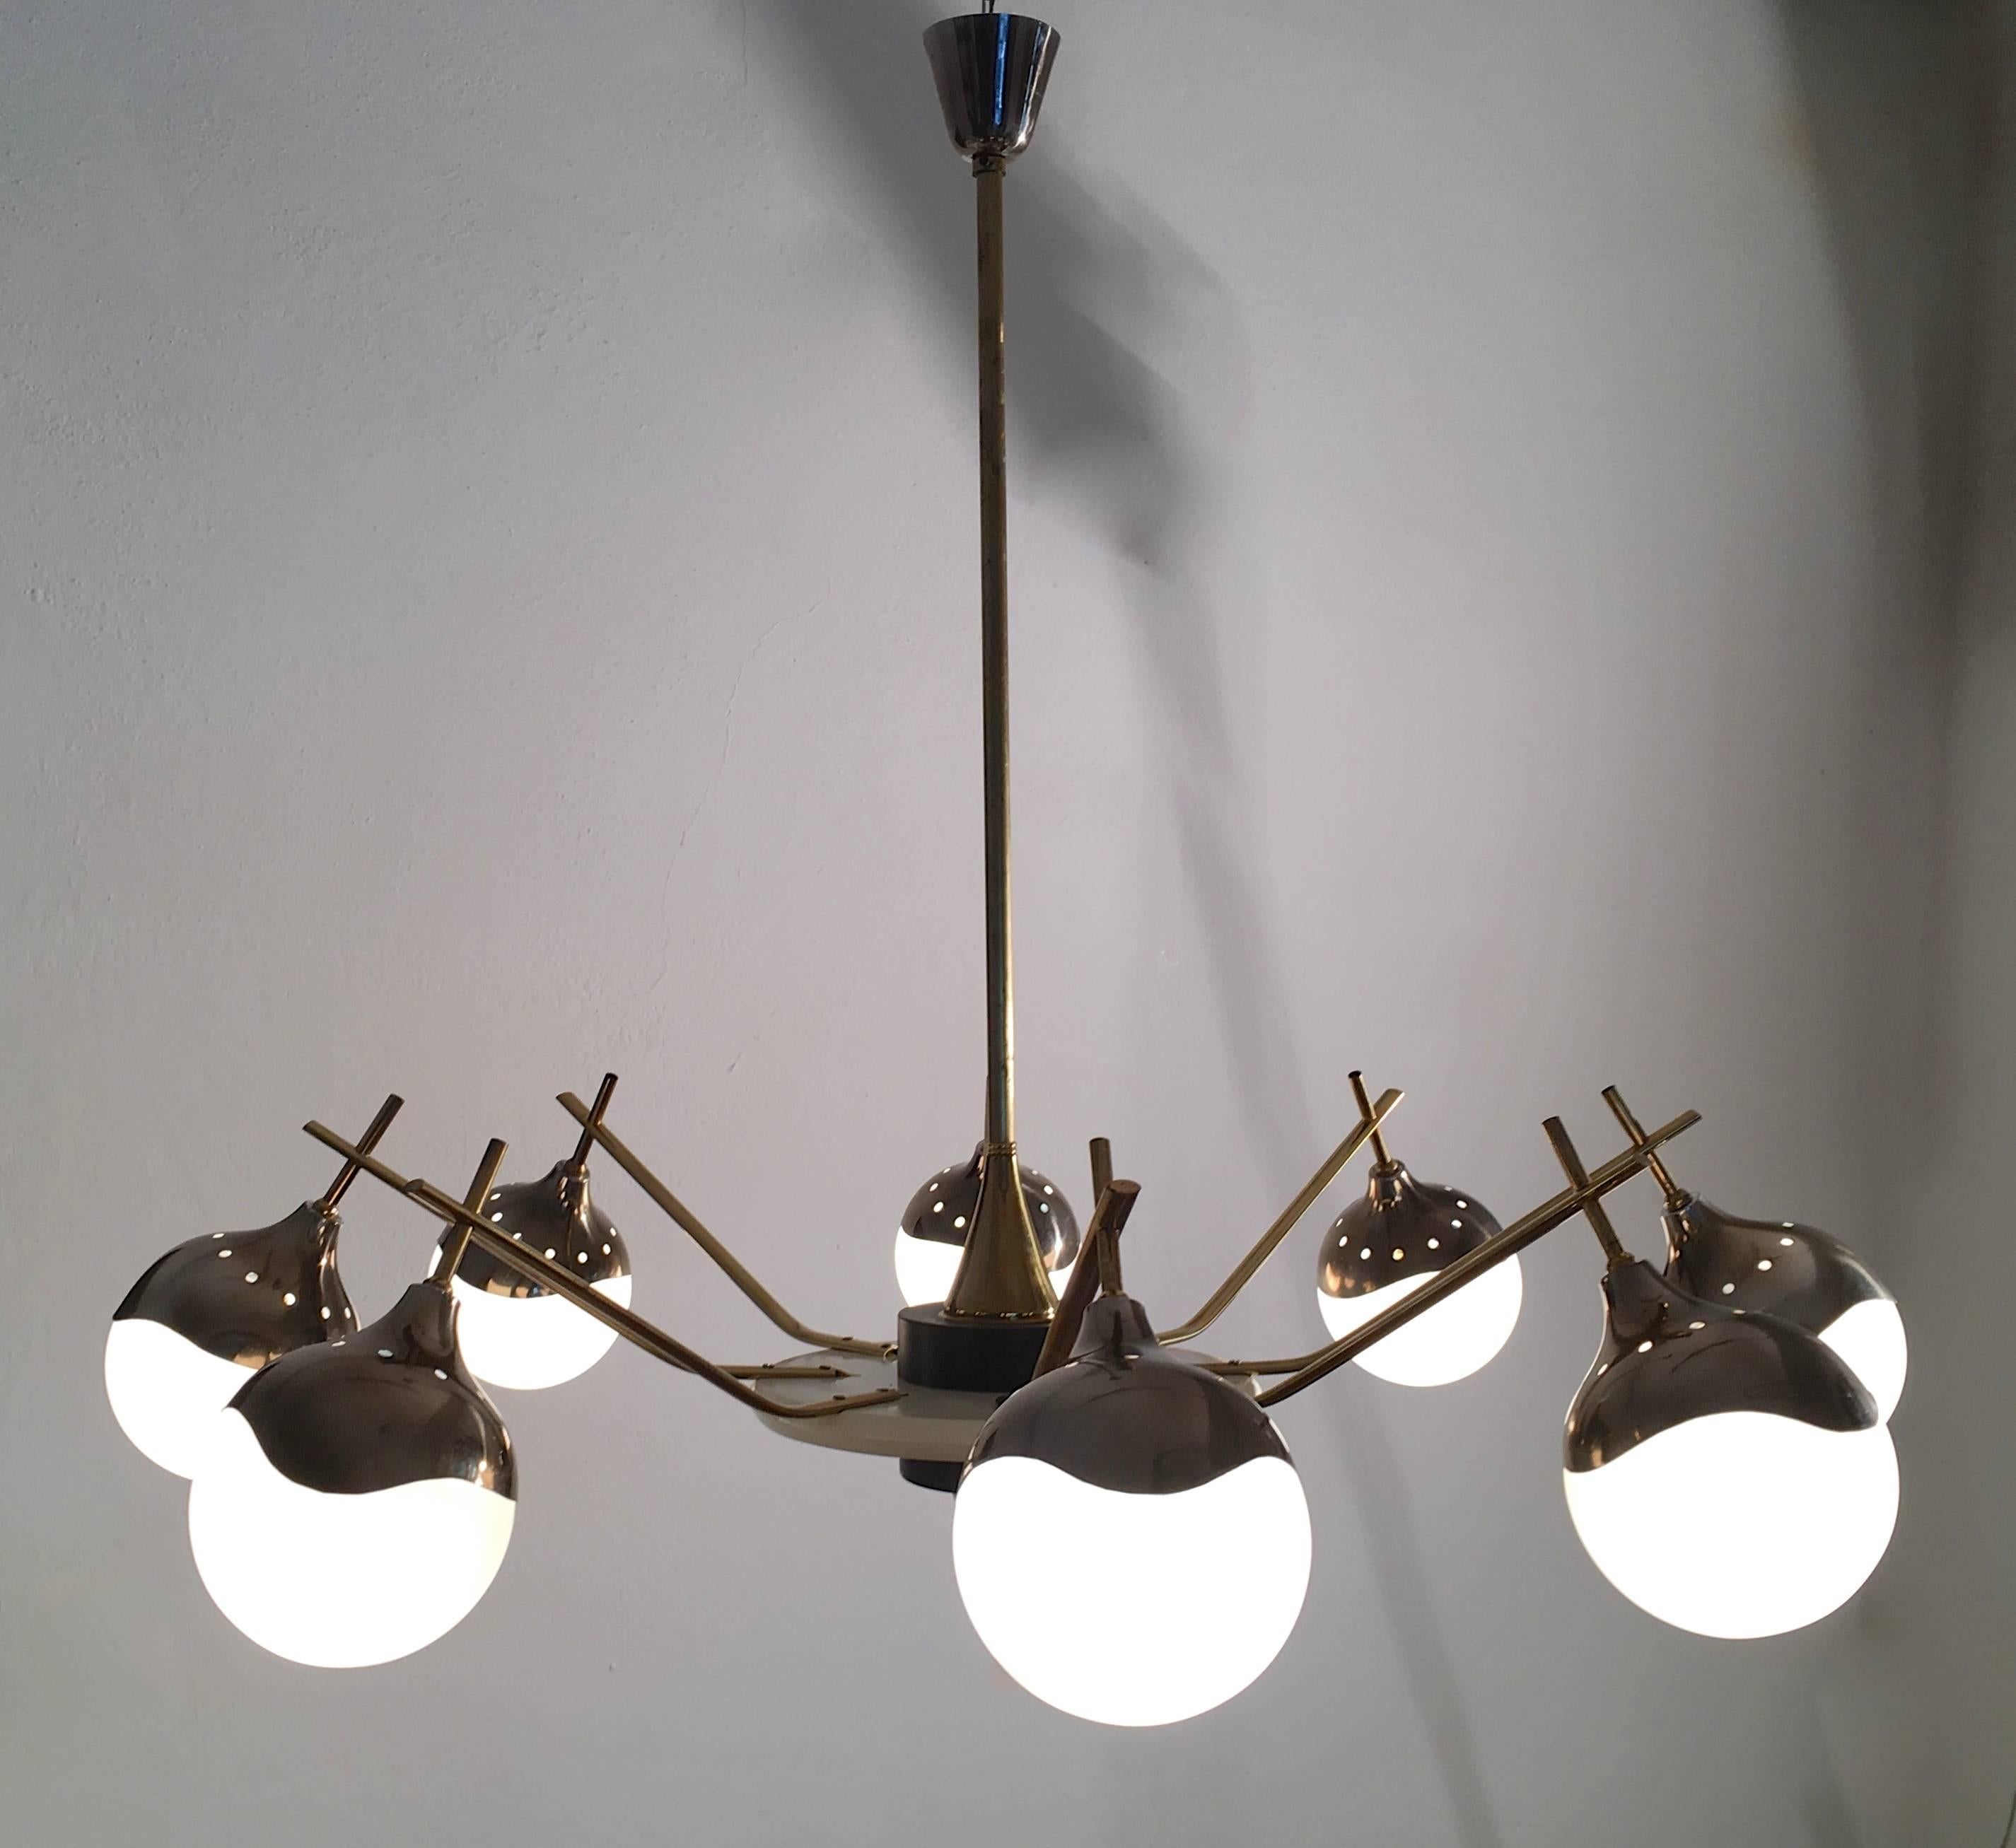 Mid-Century spider chandelier with elegantly curved metal caps holding opaline glass globes. Painted wooden centrepiece and eight brass arms that interconnect with the suspension of the metal caps.